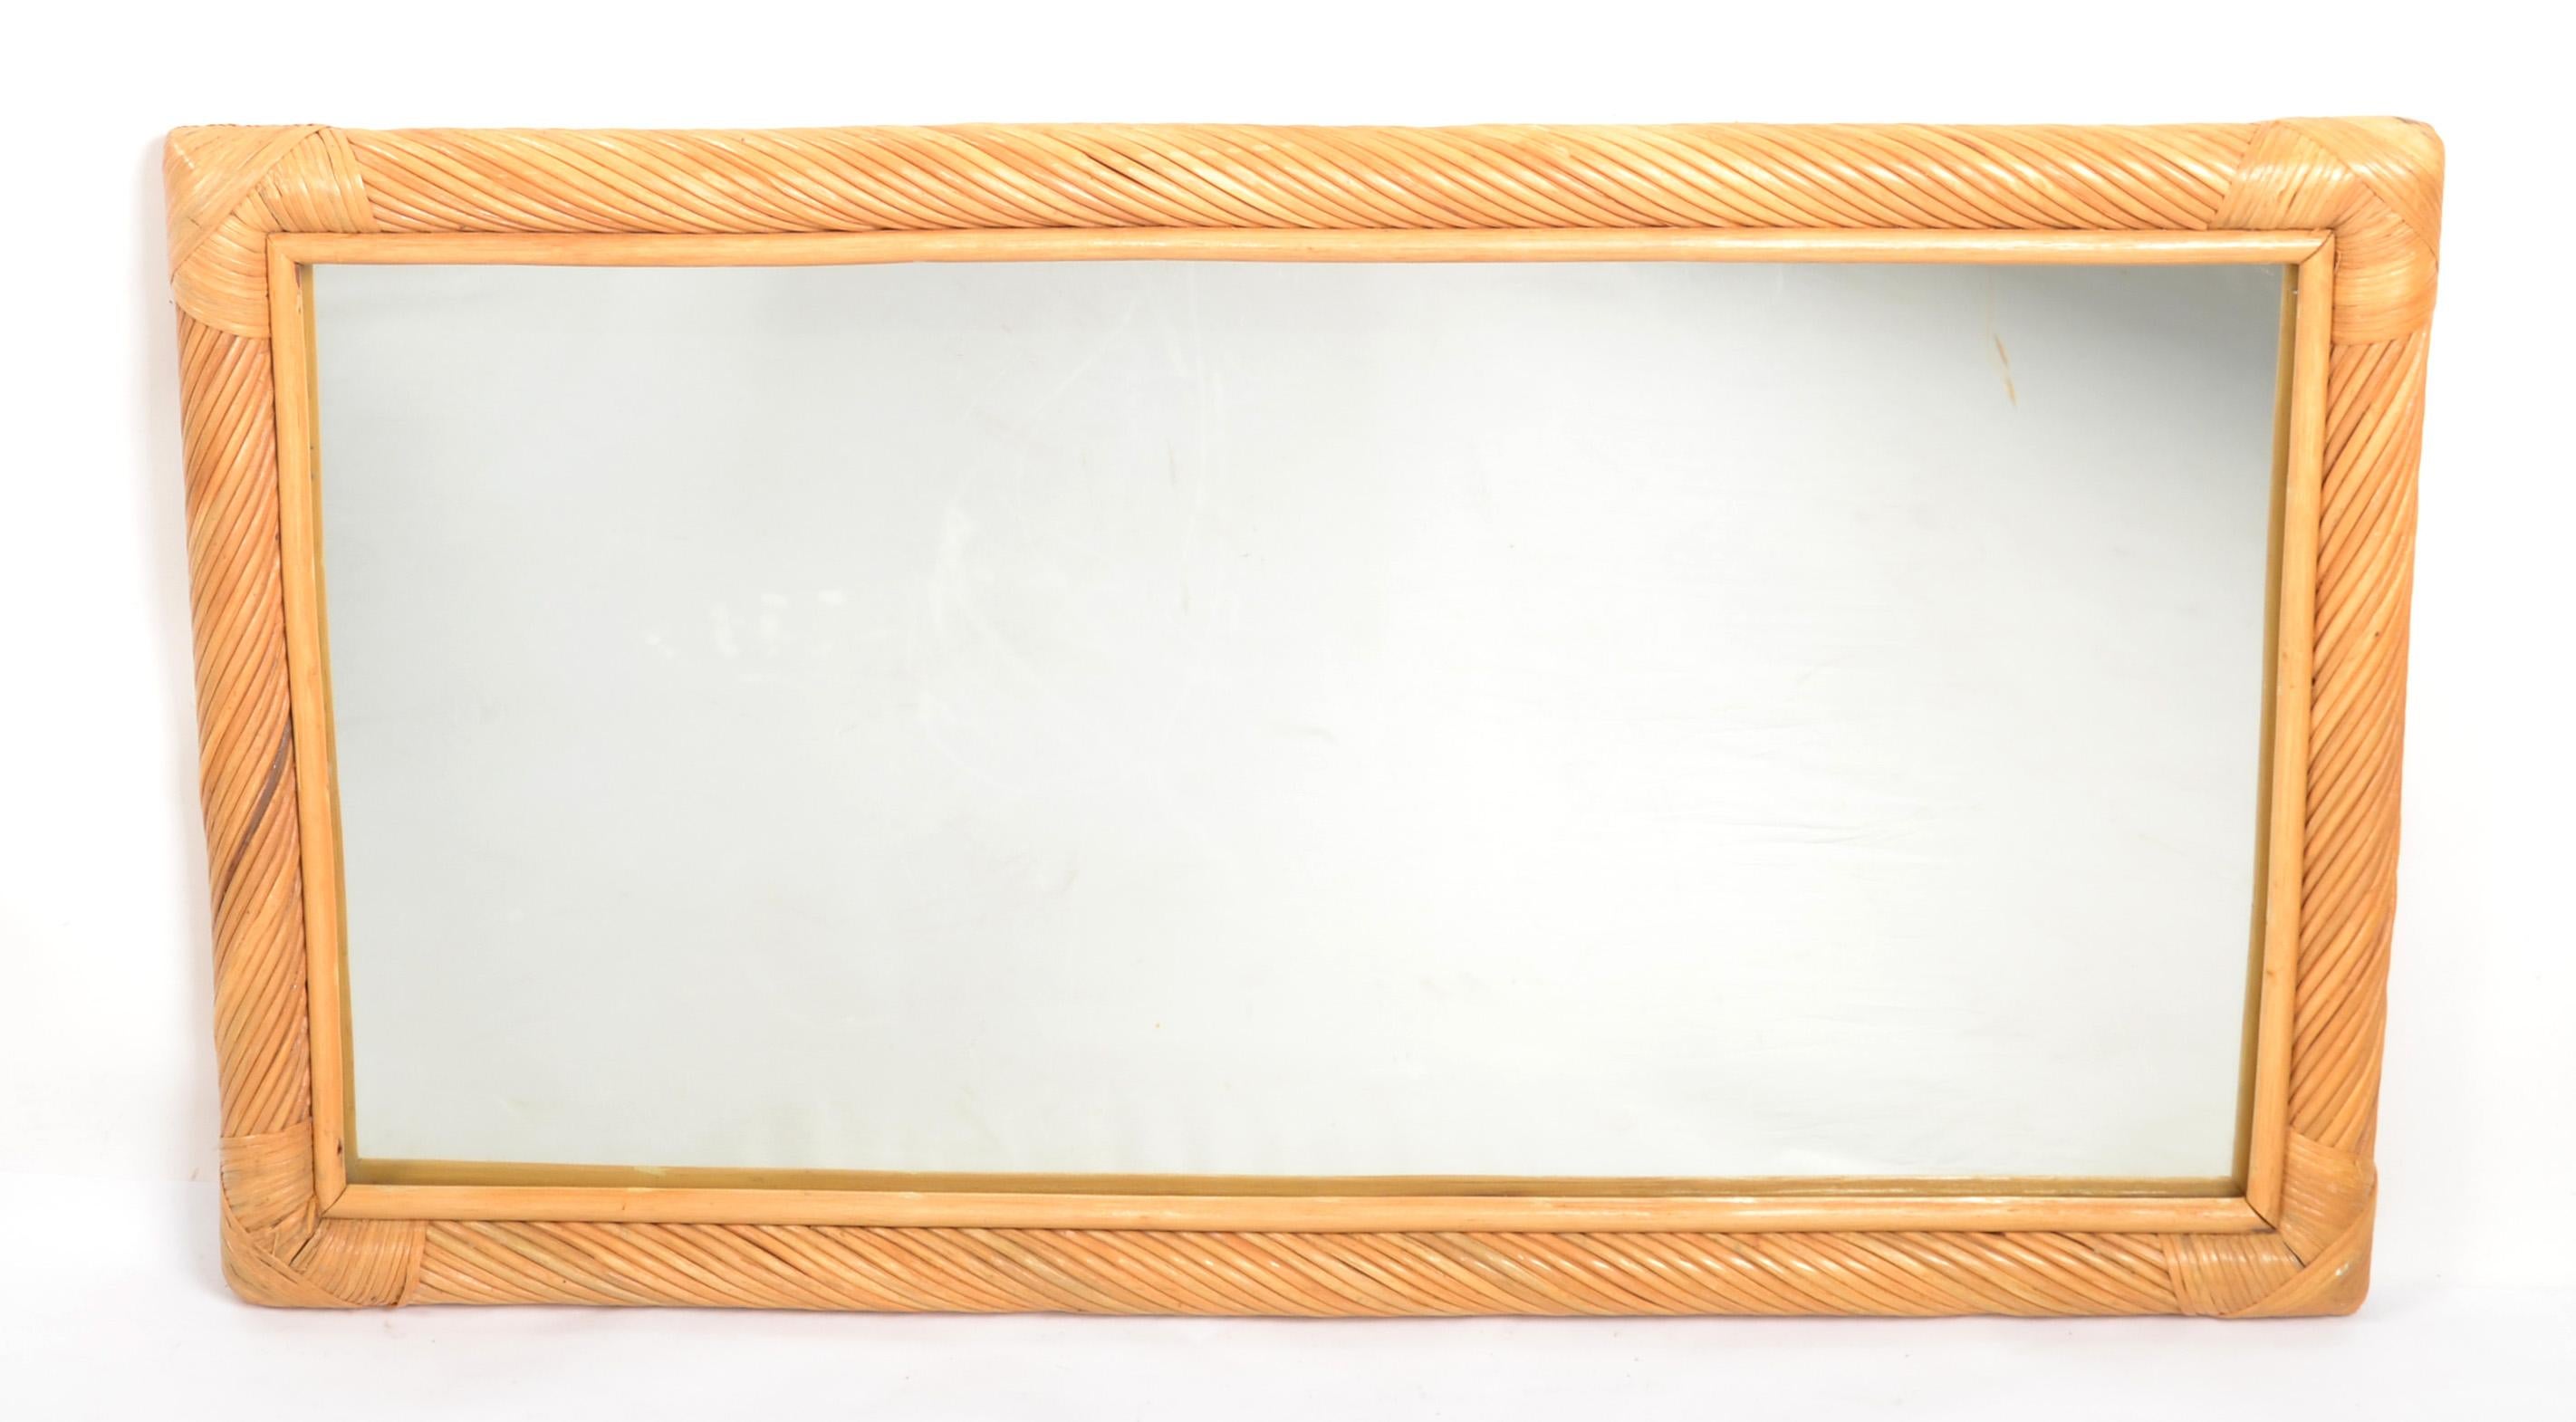 Hollywood Regency Bohemian Rectangular Handwoven Rattan and Bamboo Wall Mirror  In Good Condition For Sale In Miami, FL